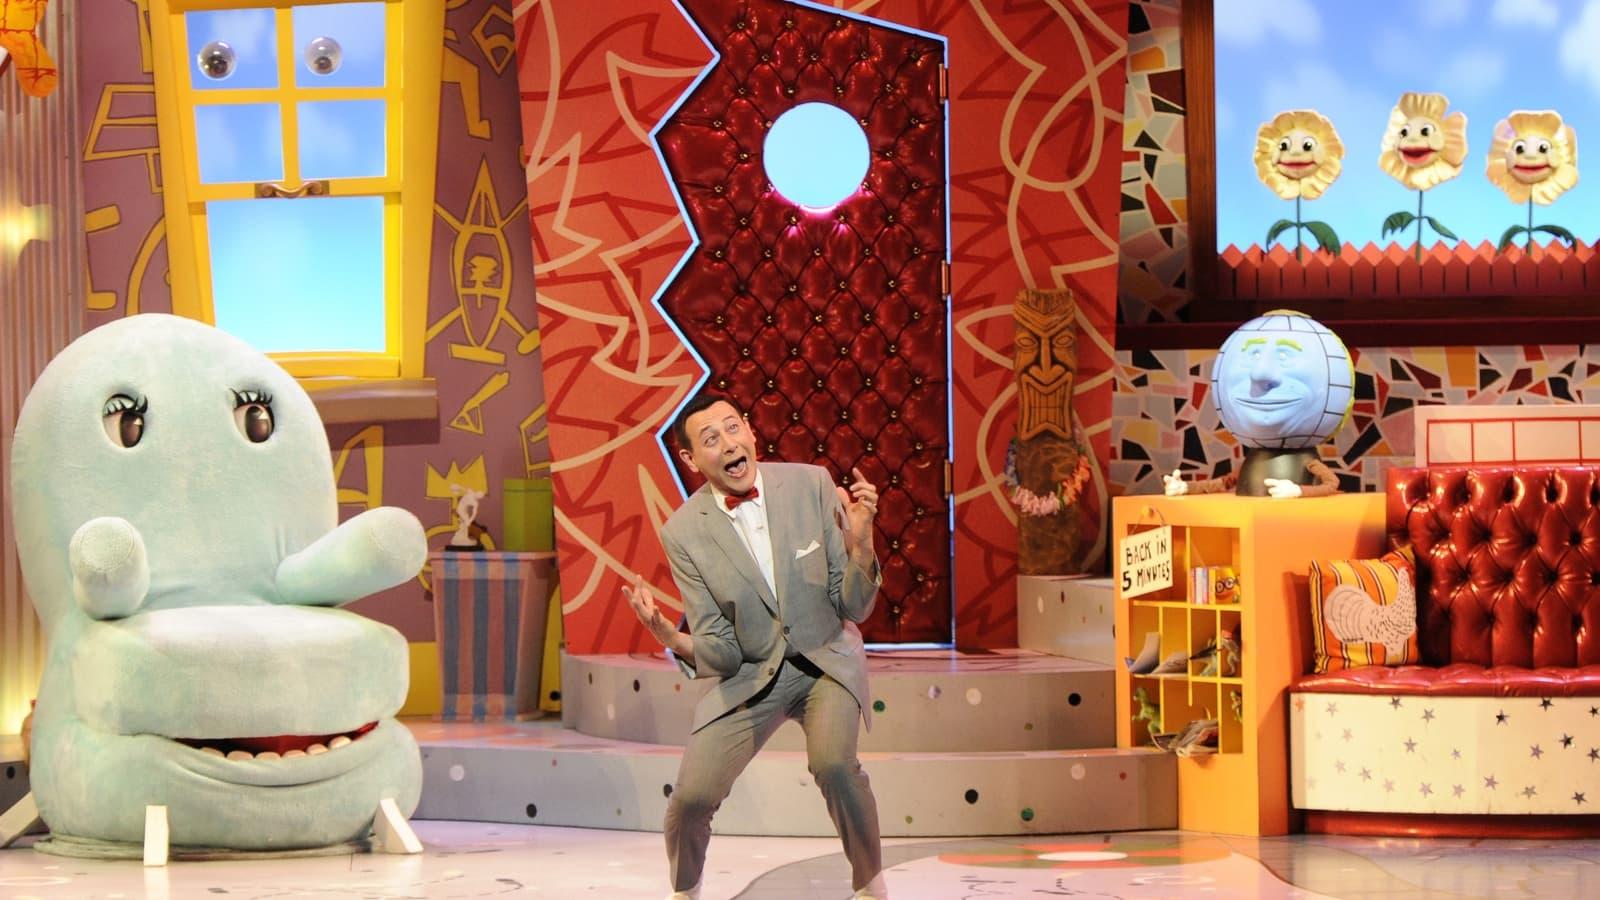 The Pee-wee Herman Show on Broadway backdrop